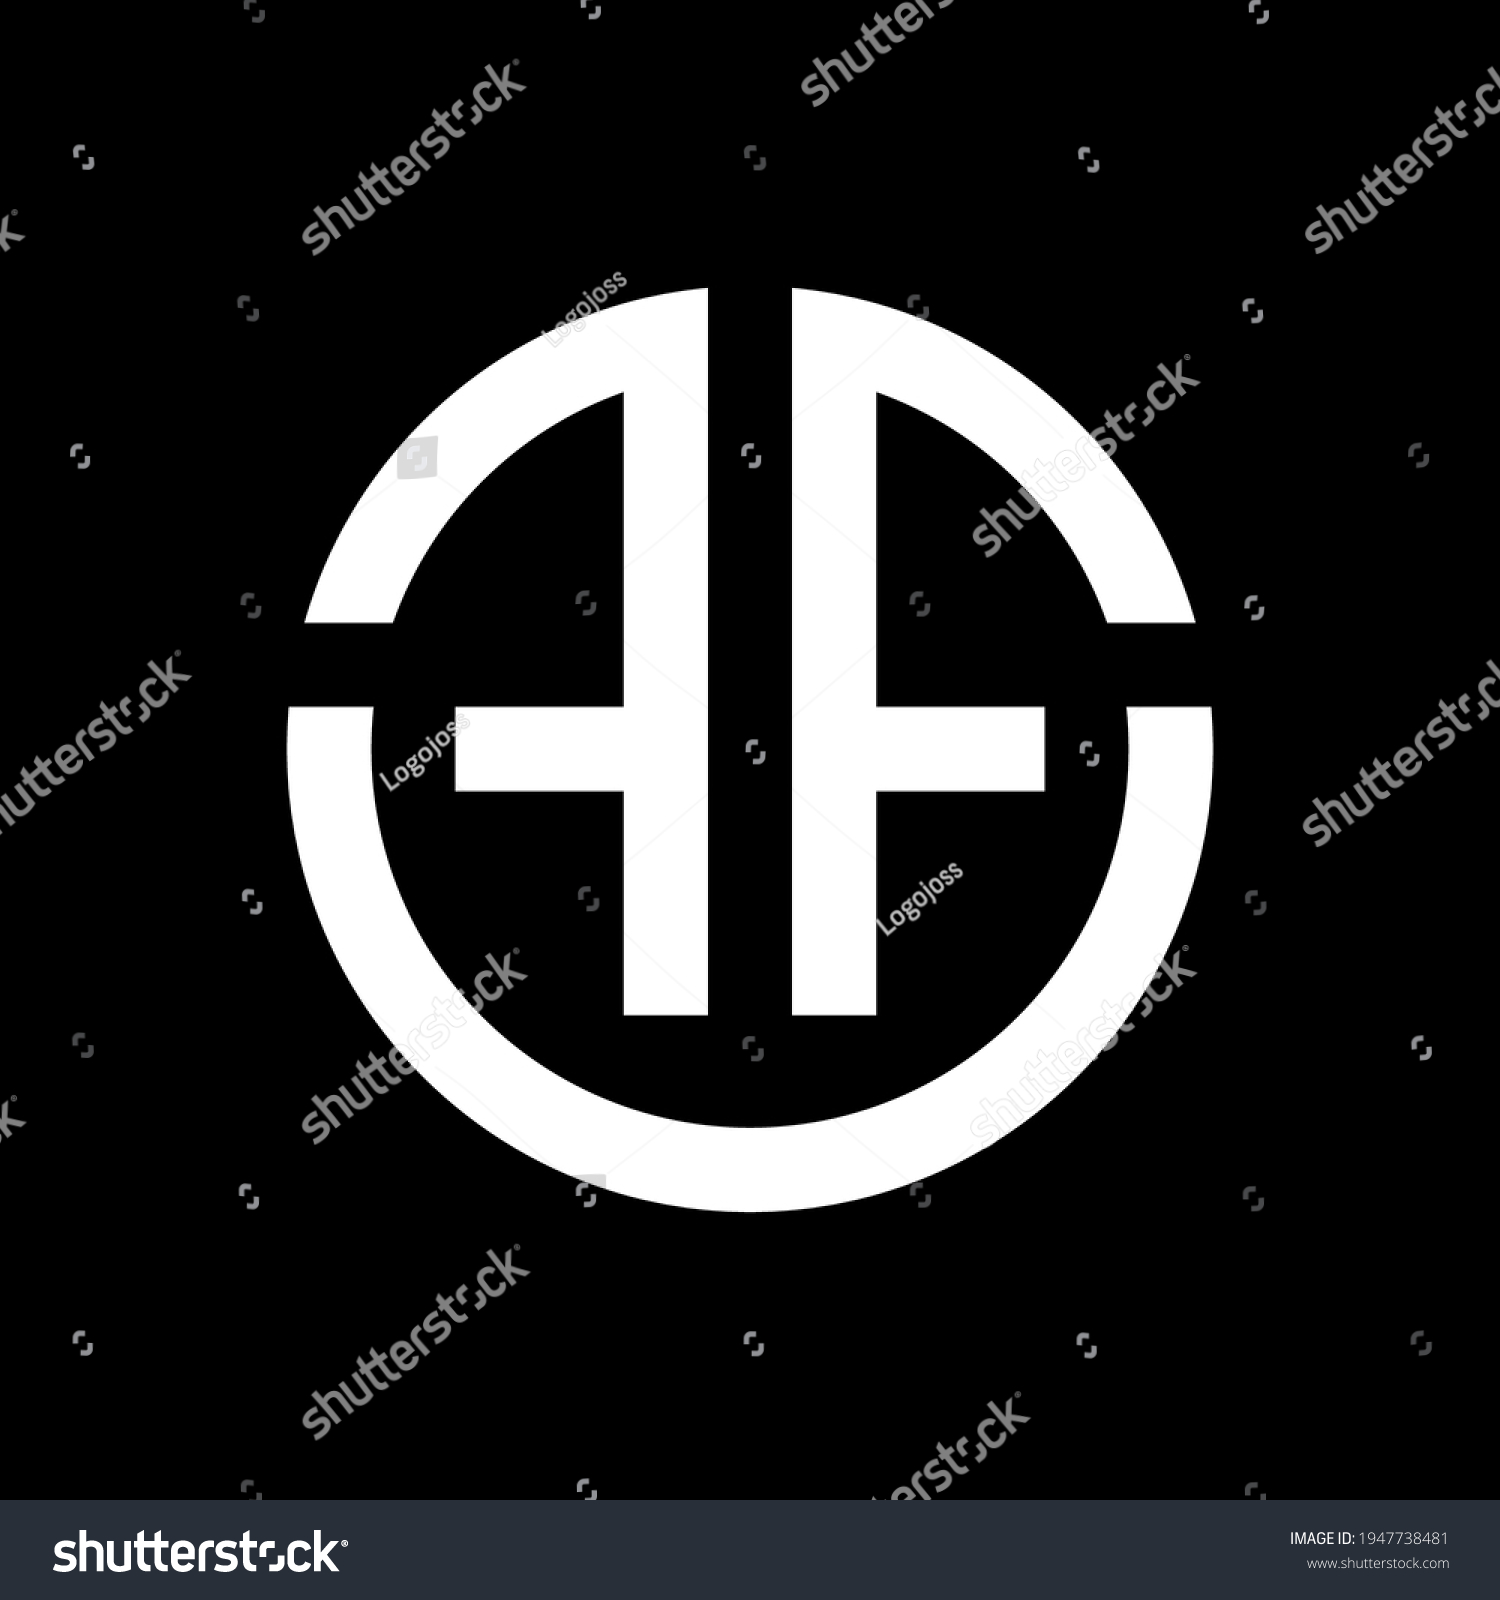 Letter Ff Circle Logo Template Stock Vector (Royalty Free) 1947738481 ...